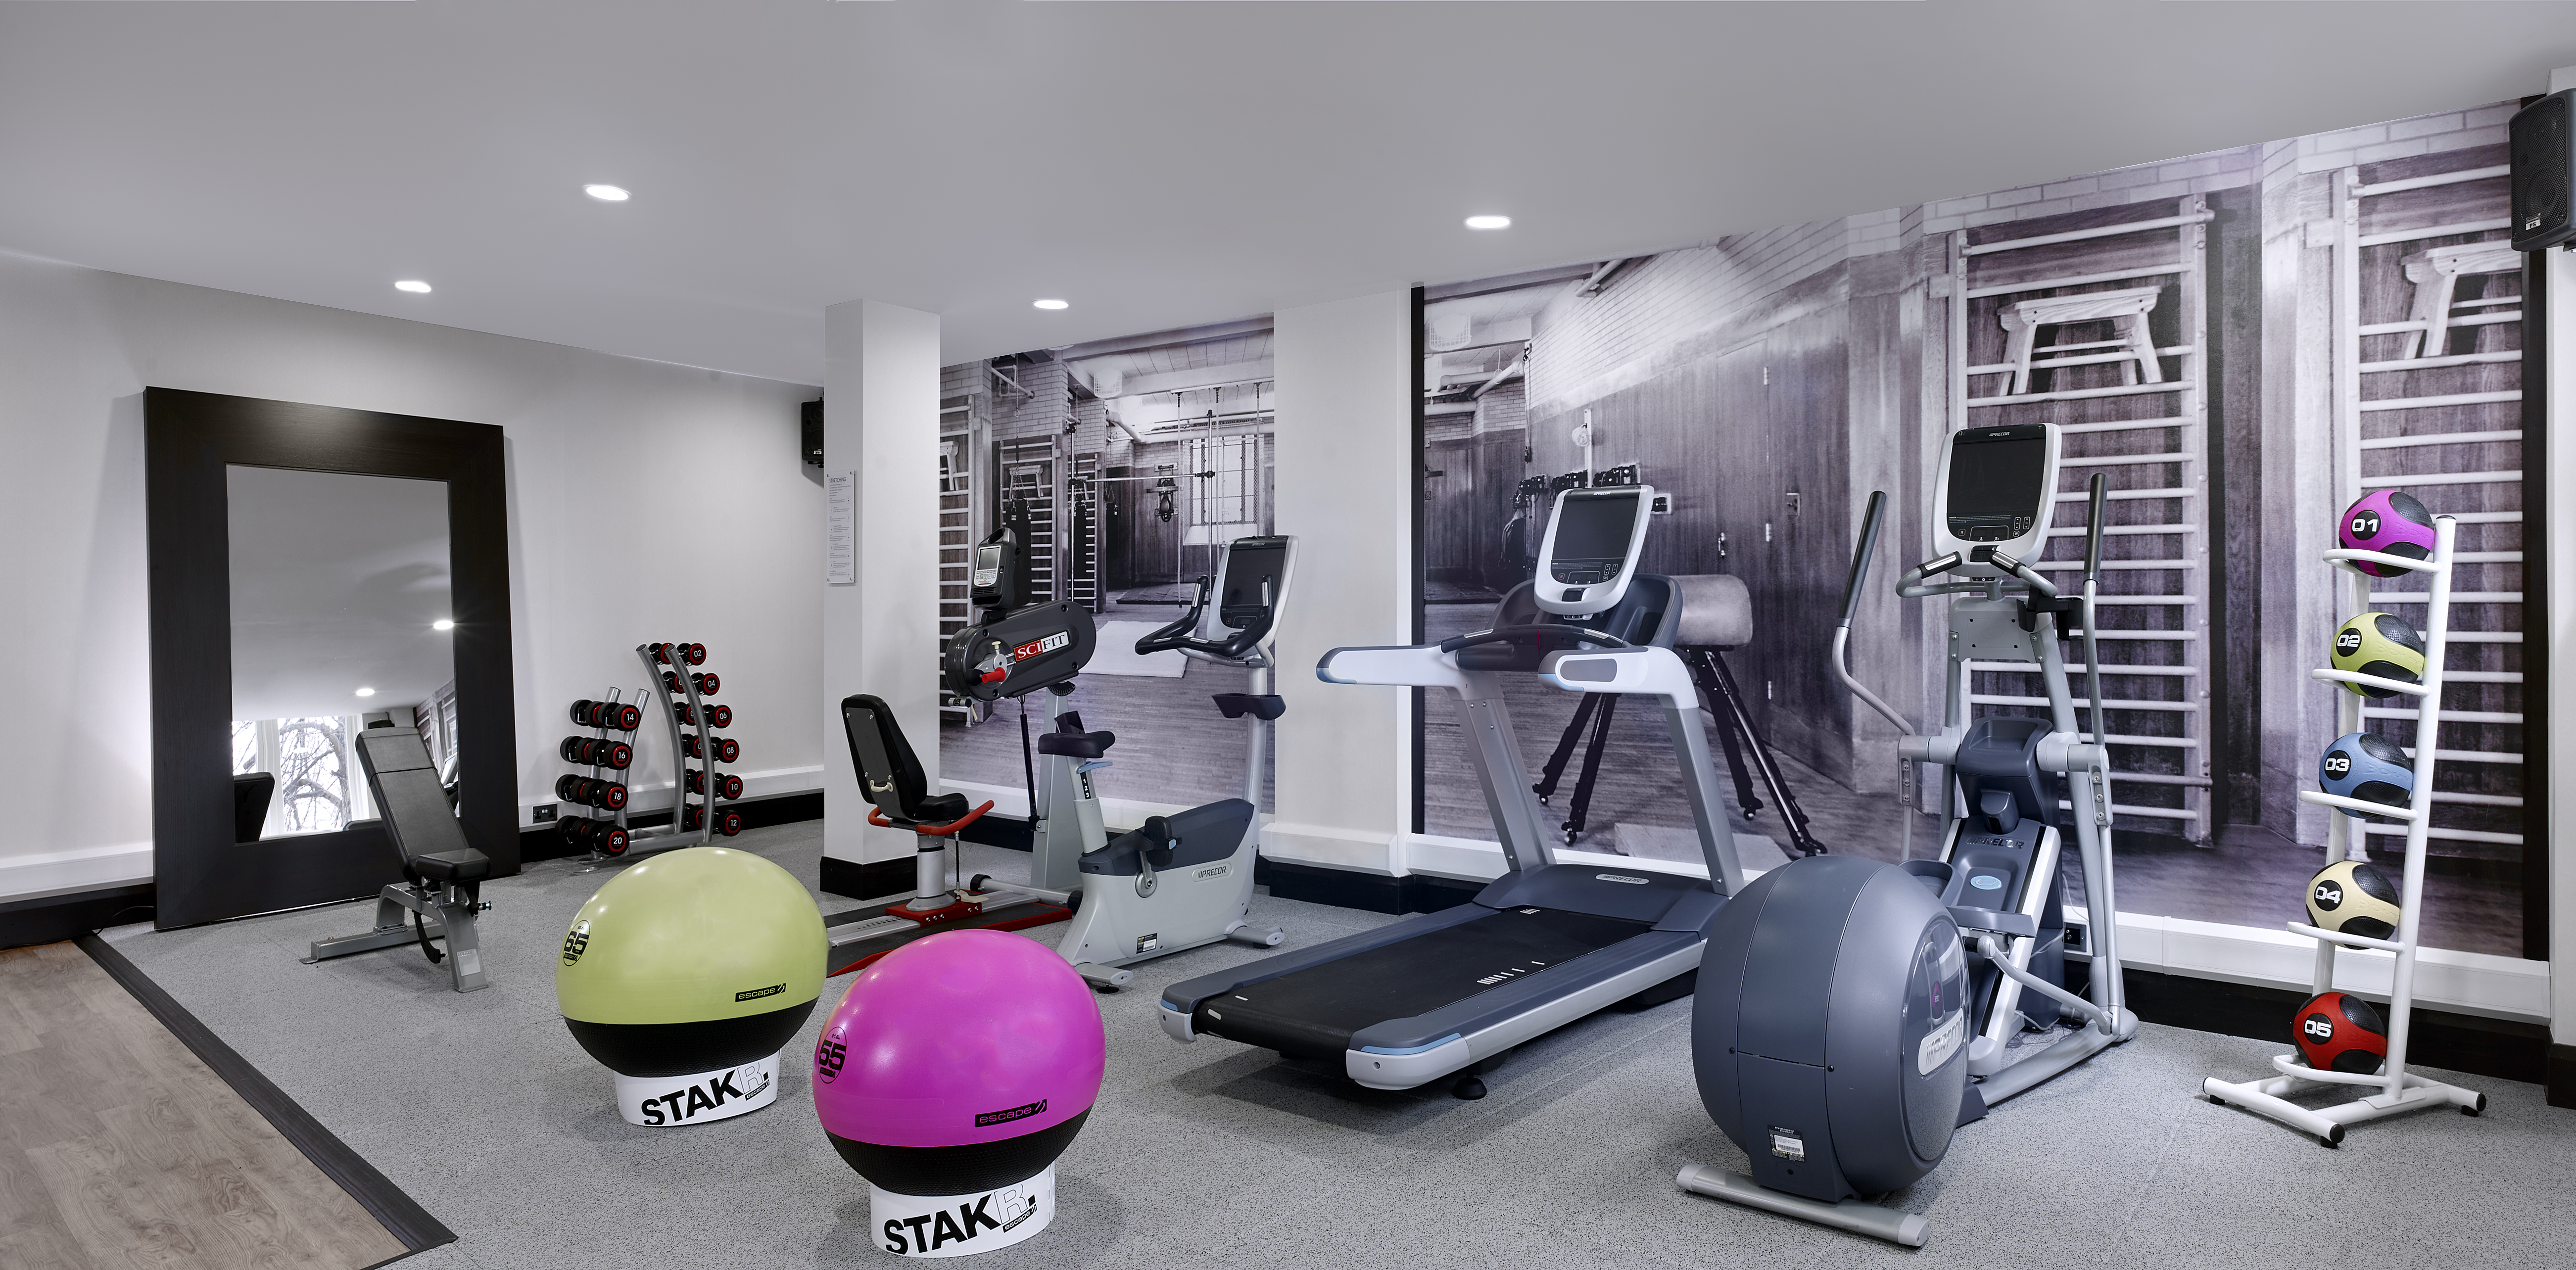 Fitness Center With Exercise Balls, Weight Bench, Large Mirrors, Free Weights, Mirrored Wall, Precor Cardio Equipment, and Weight Balls